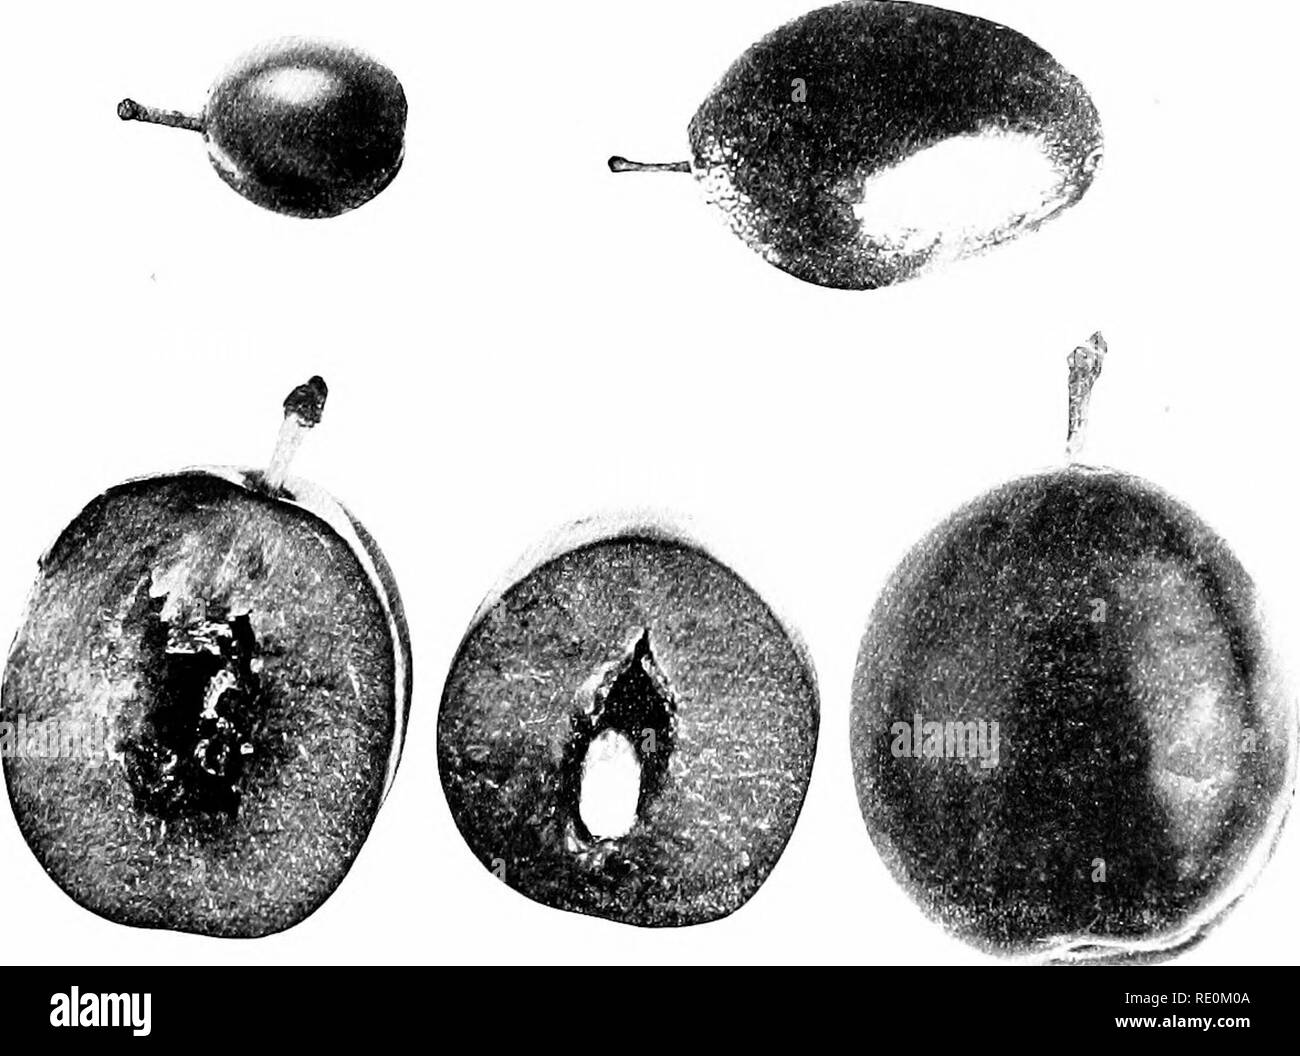 . Experiments with plants. Botany. 416 EXPEBJMENTS WITS PLANlti or less well-developed seed. Some of the seeds are normal in size and shape, others more or less de- formed and abortive, while in a certain percentage seed and stone are both absent. Fiu-. 236 shows,. 236. The Stoneless Plum, lowet row; and parents, upper row. At the right in the lower row the Stoneless Plum, external appearance: in the middle the fruit cut open showing a normal seed with a cavity where the stone would ordinarily he; at the left, another fruit containing neither stone nor seed, the latter being represented by a s Stock Photo